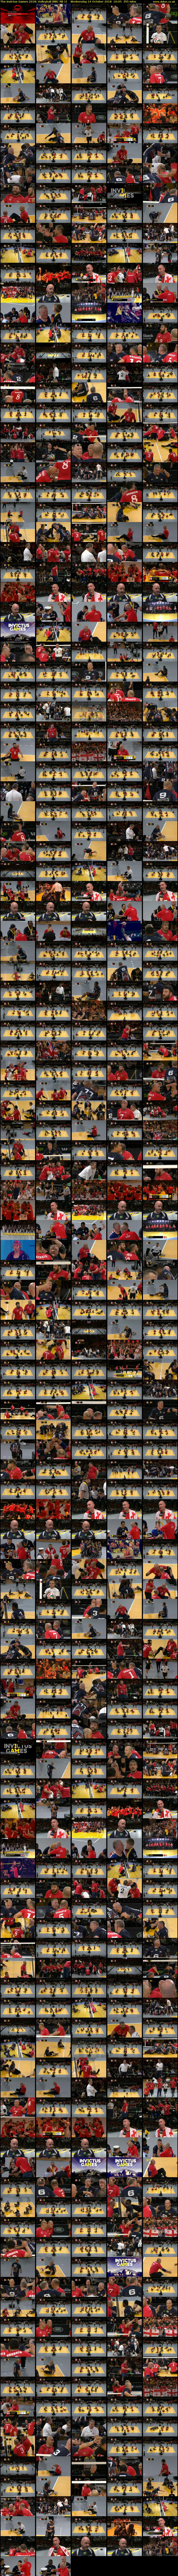 The Invictus Games 2018: Volleyball (BBC RB 1) Wednesday 24 October 2018 10:05 - 16:00